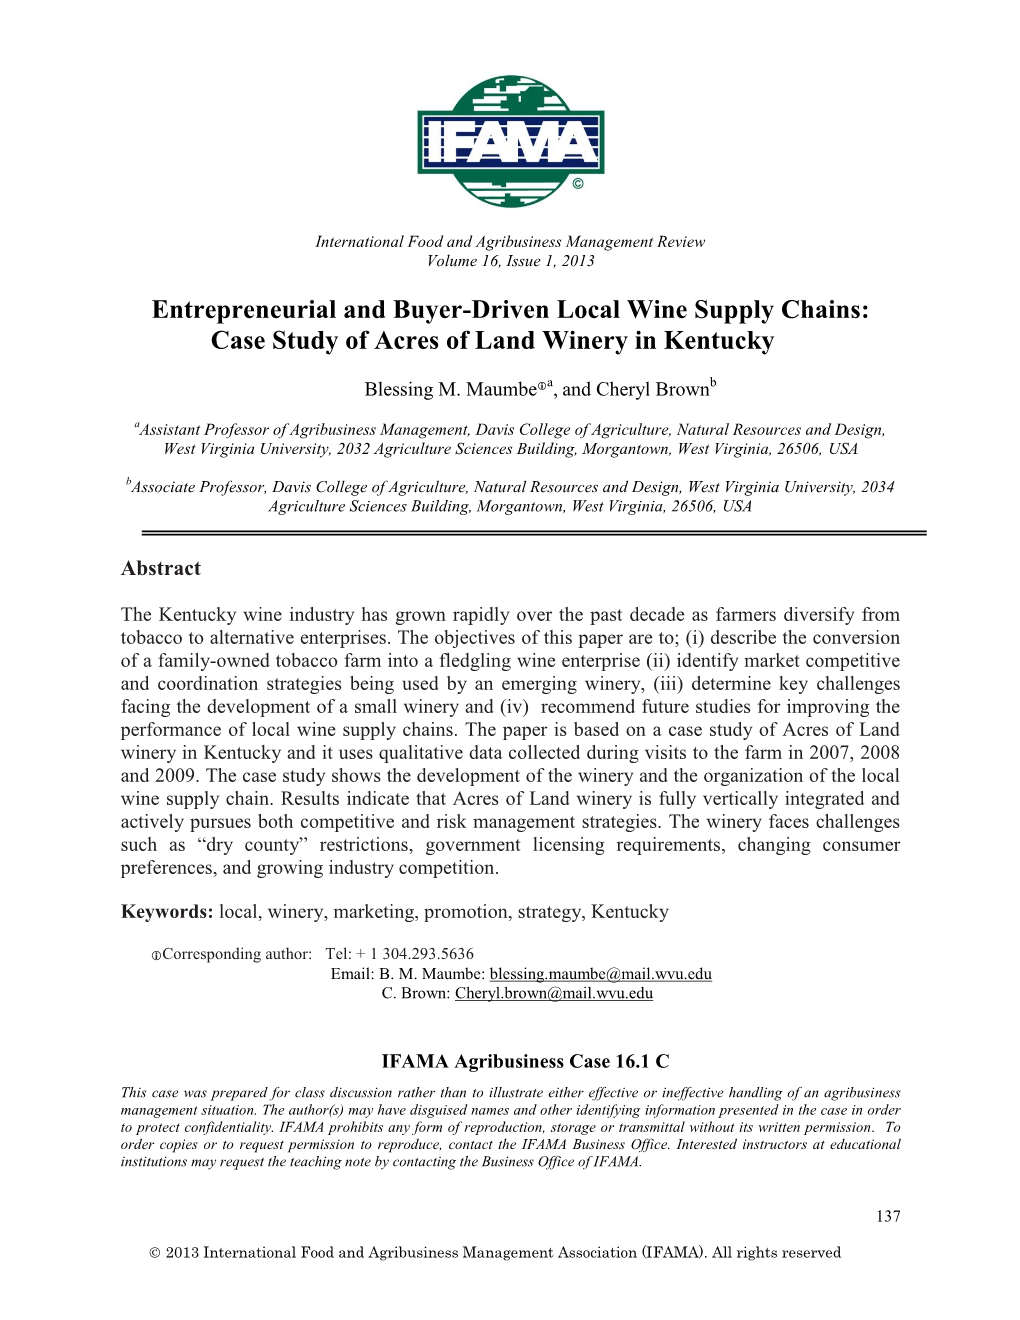 Entrepreneurial and Buyer-Driven Local Wine Supply Chains: Case Study of Acres of Land Winery in Kentucky